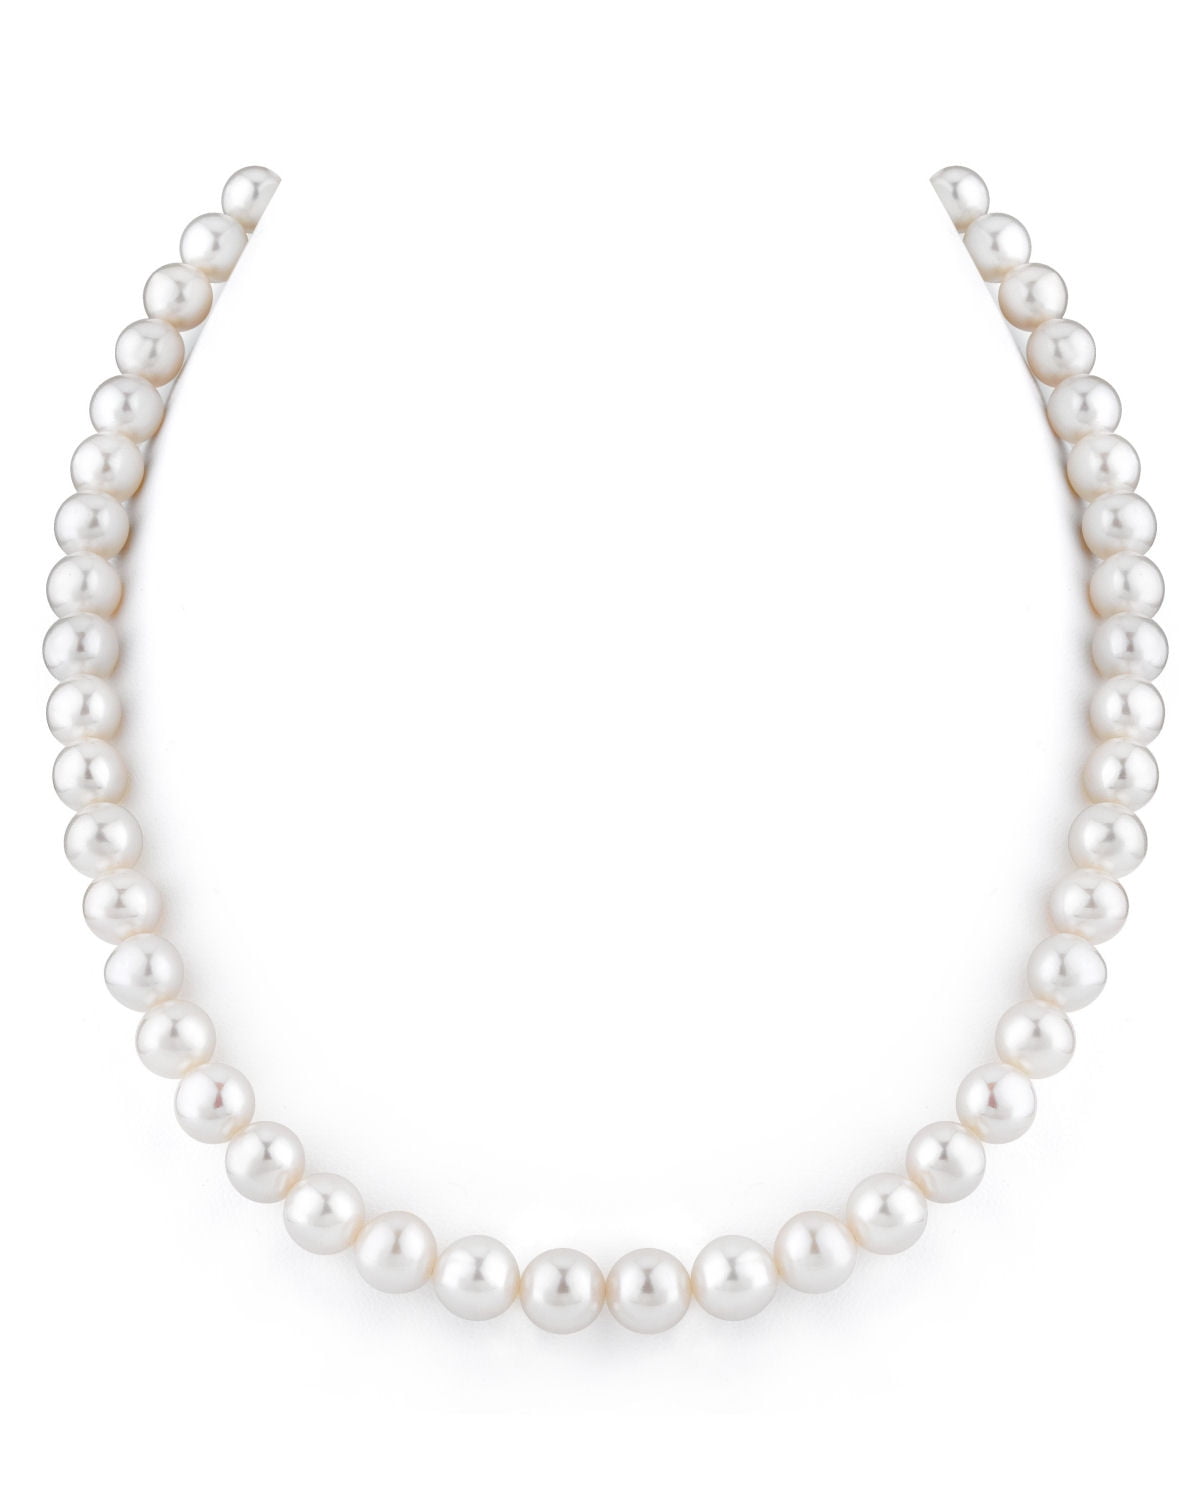 Details about   Luster AA White Color Near Round Shape 8 To 9.25 MM Freshwater Pearl Strand 